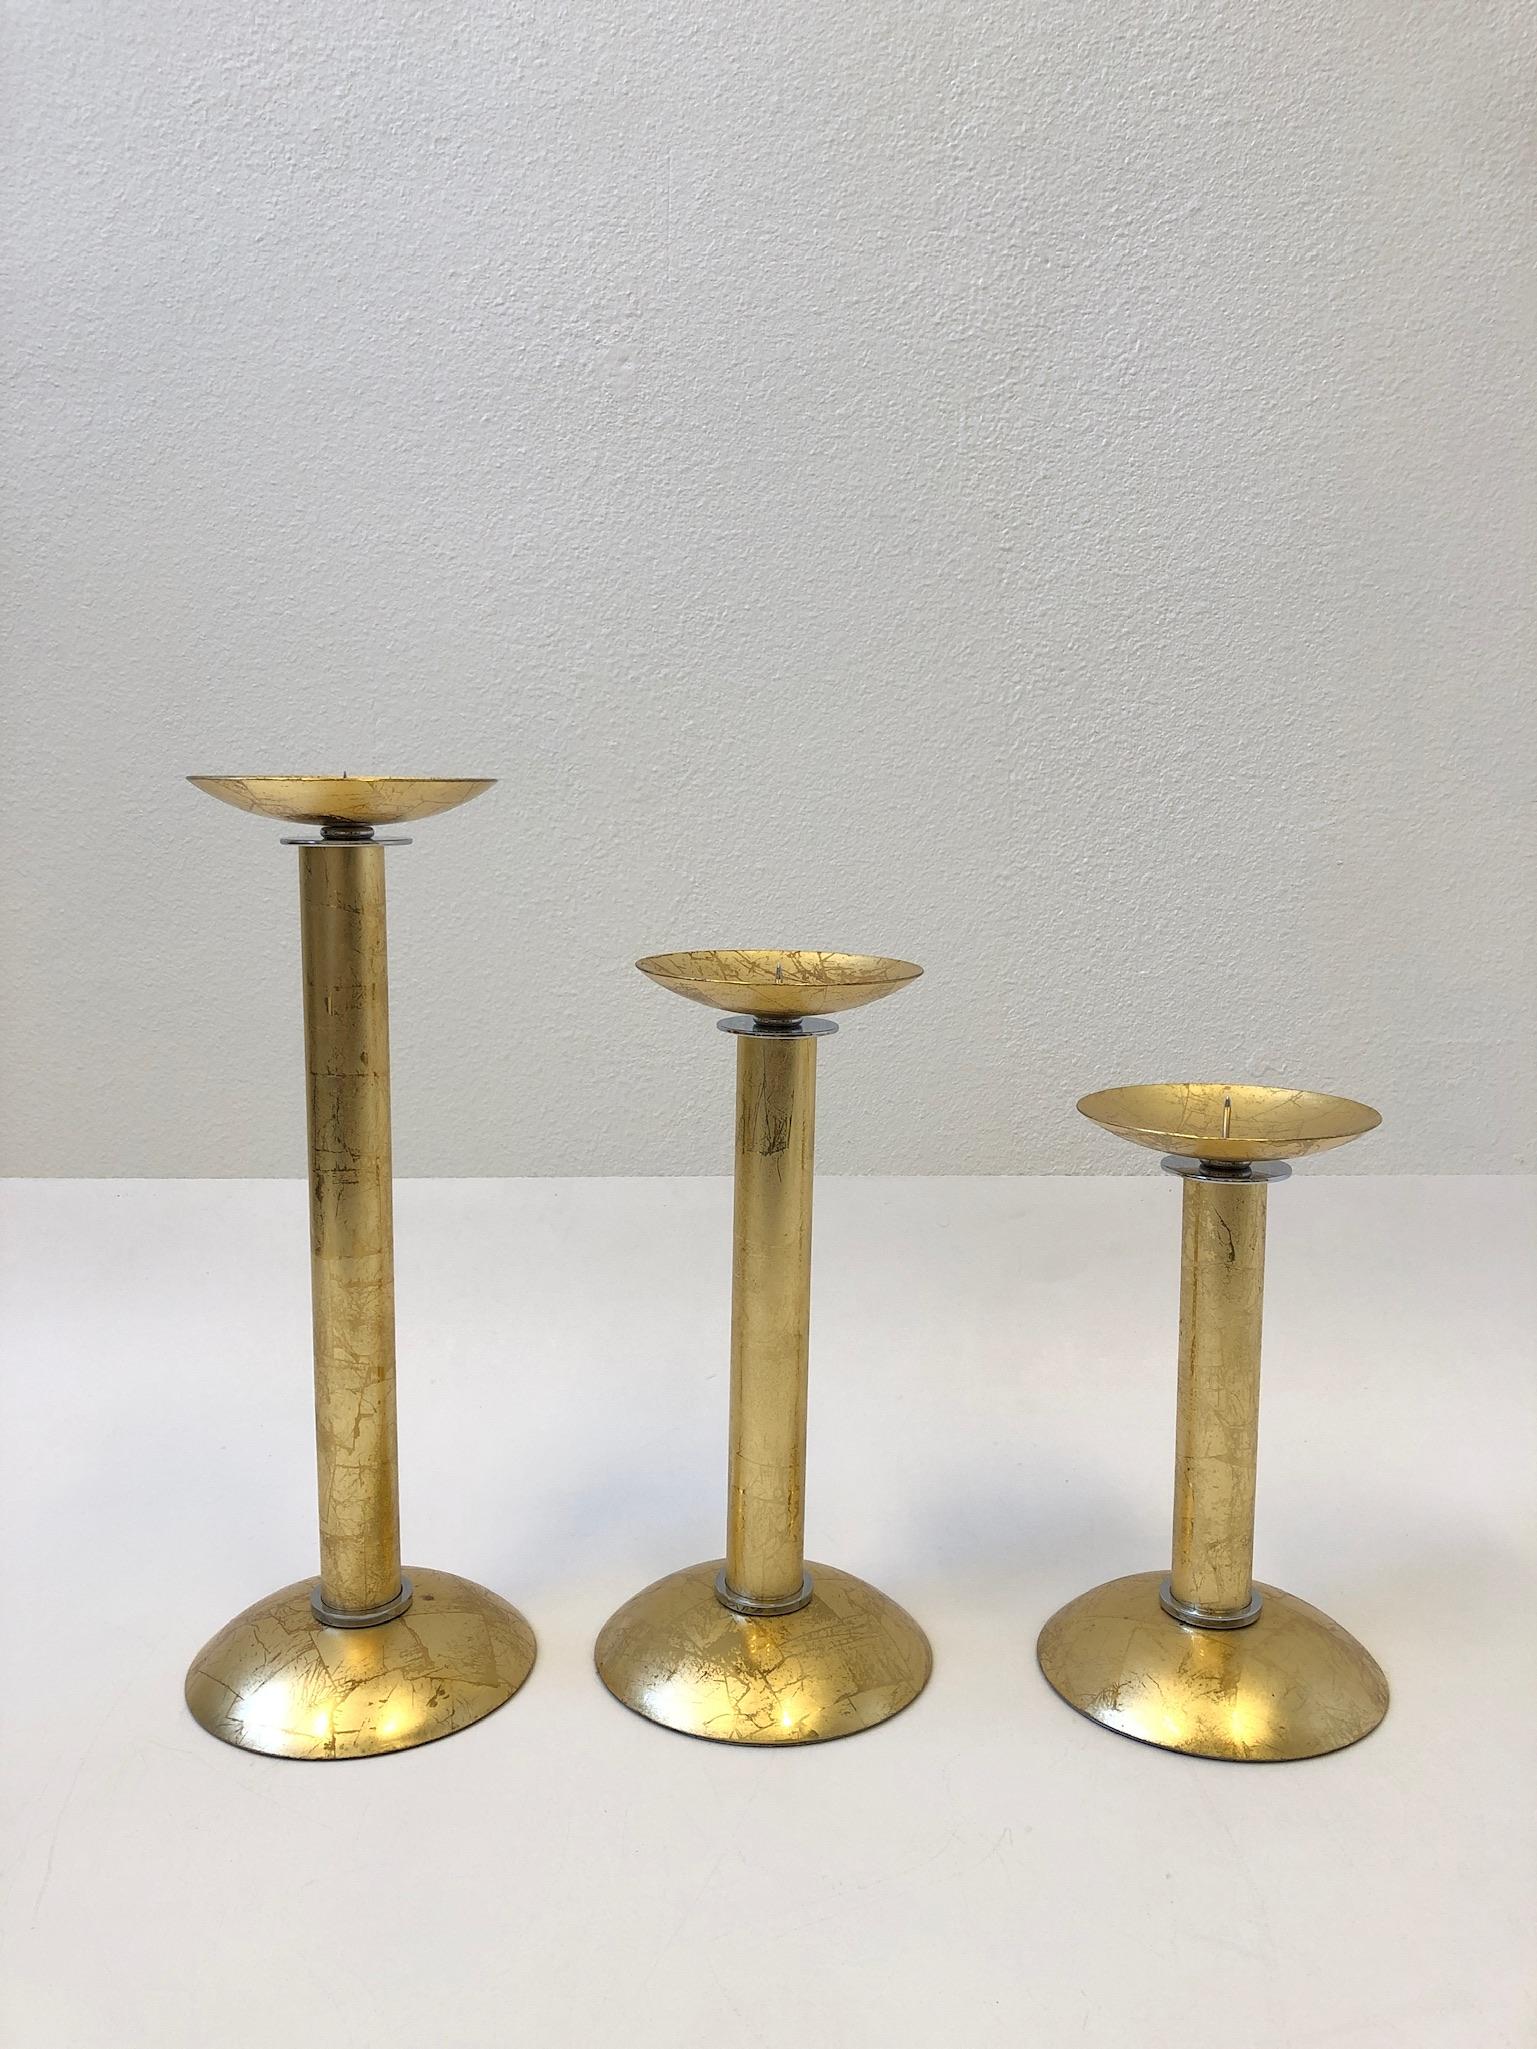 A glamorous set of three gold leaf brass and chrome candlesticks design by renowned American designer Karl Springer in the 1980s. The gold leaf brass finish is very unusual as they are usually polish brass. The candlesticks are in original